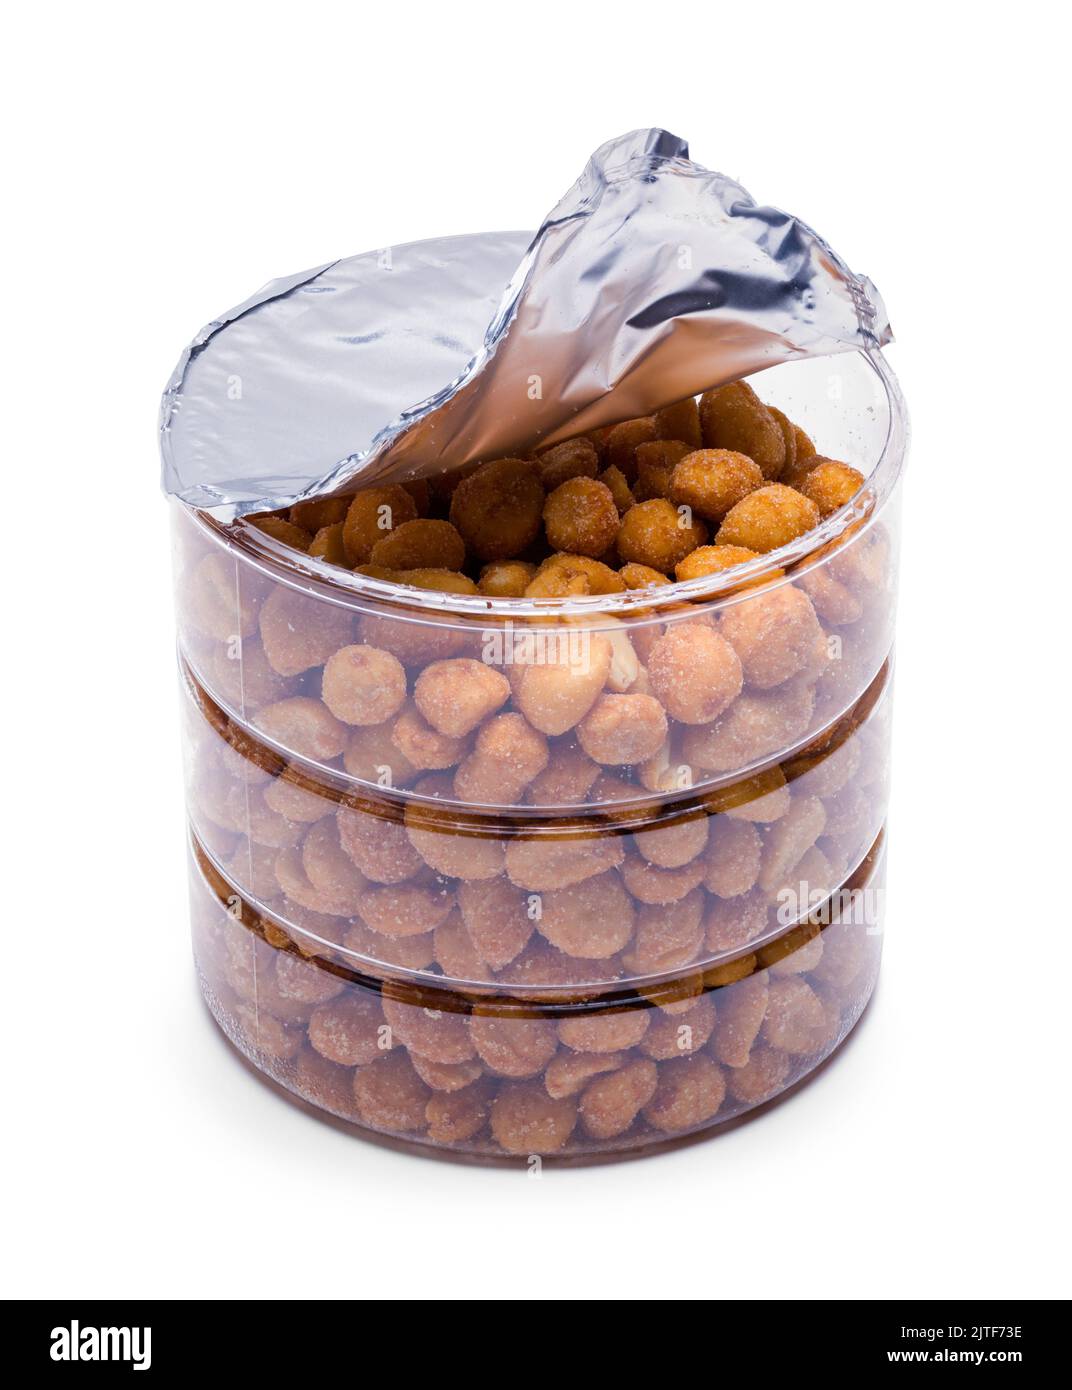 Open Can of Honey Roasted Peanuts Cut Out on White. Stock Photo